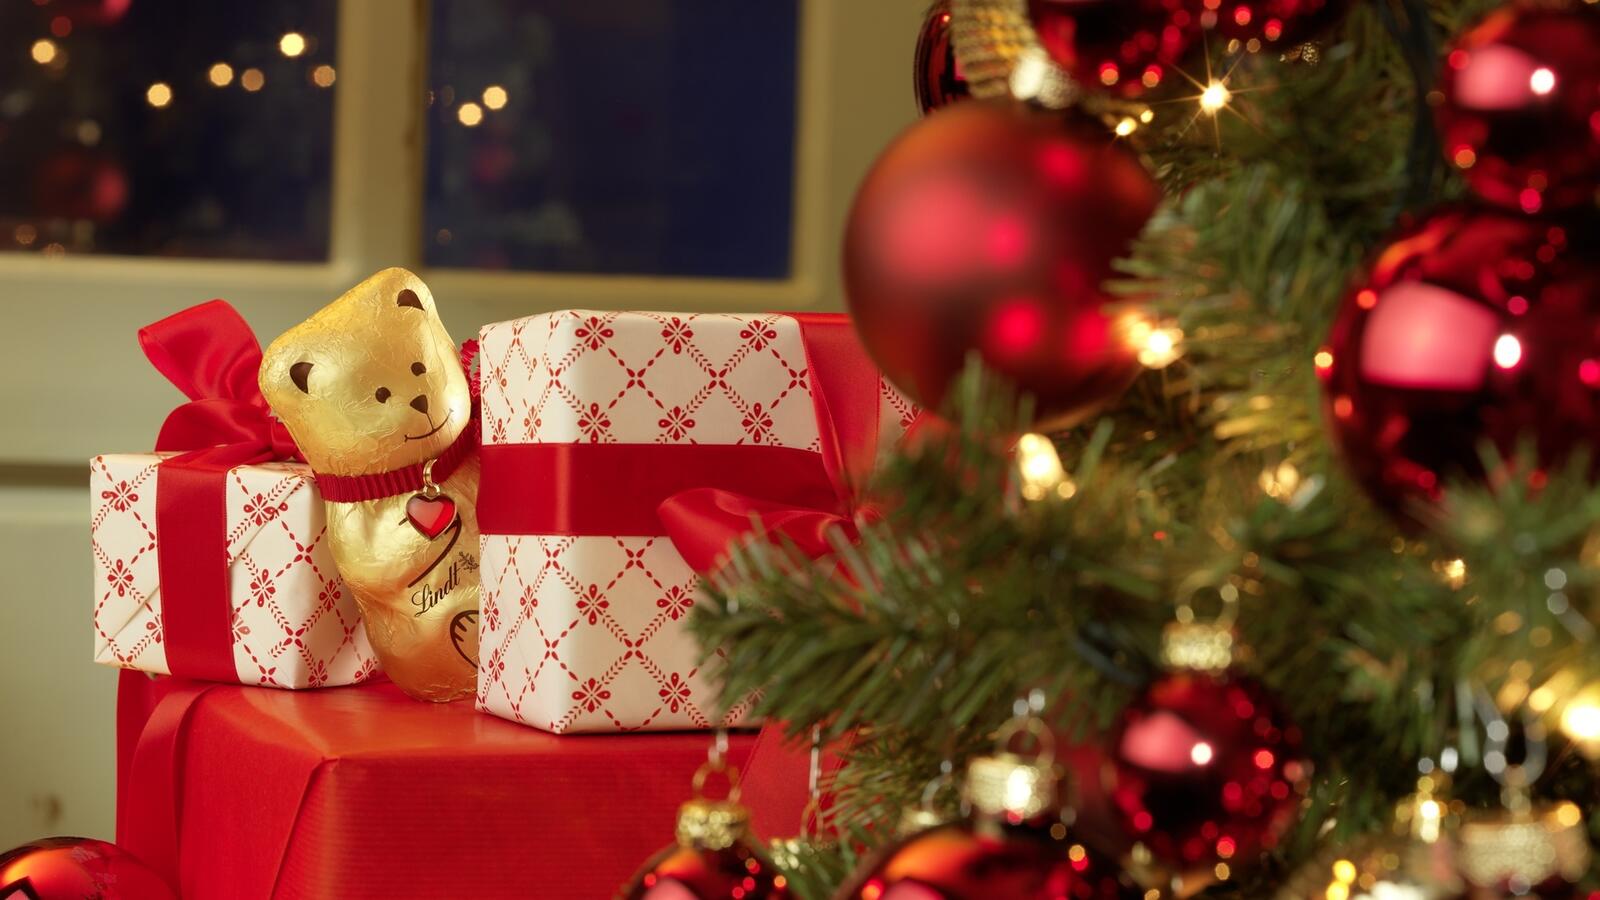 Wallpapers bear gifts new year on the desktop